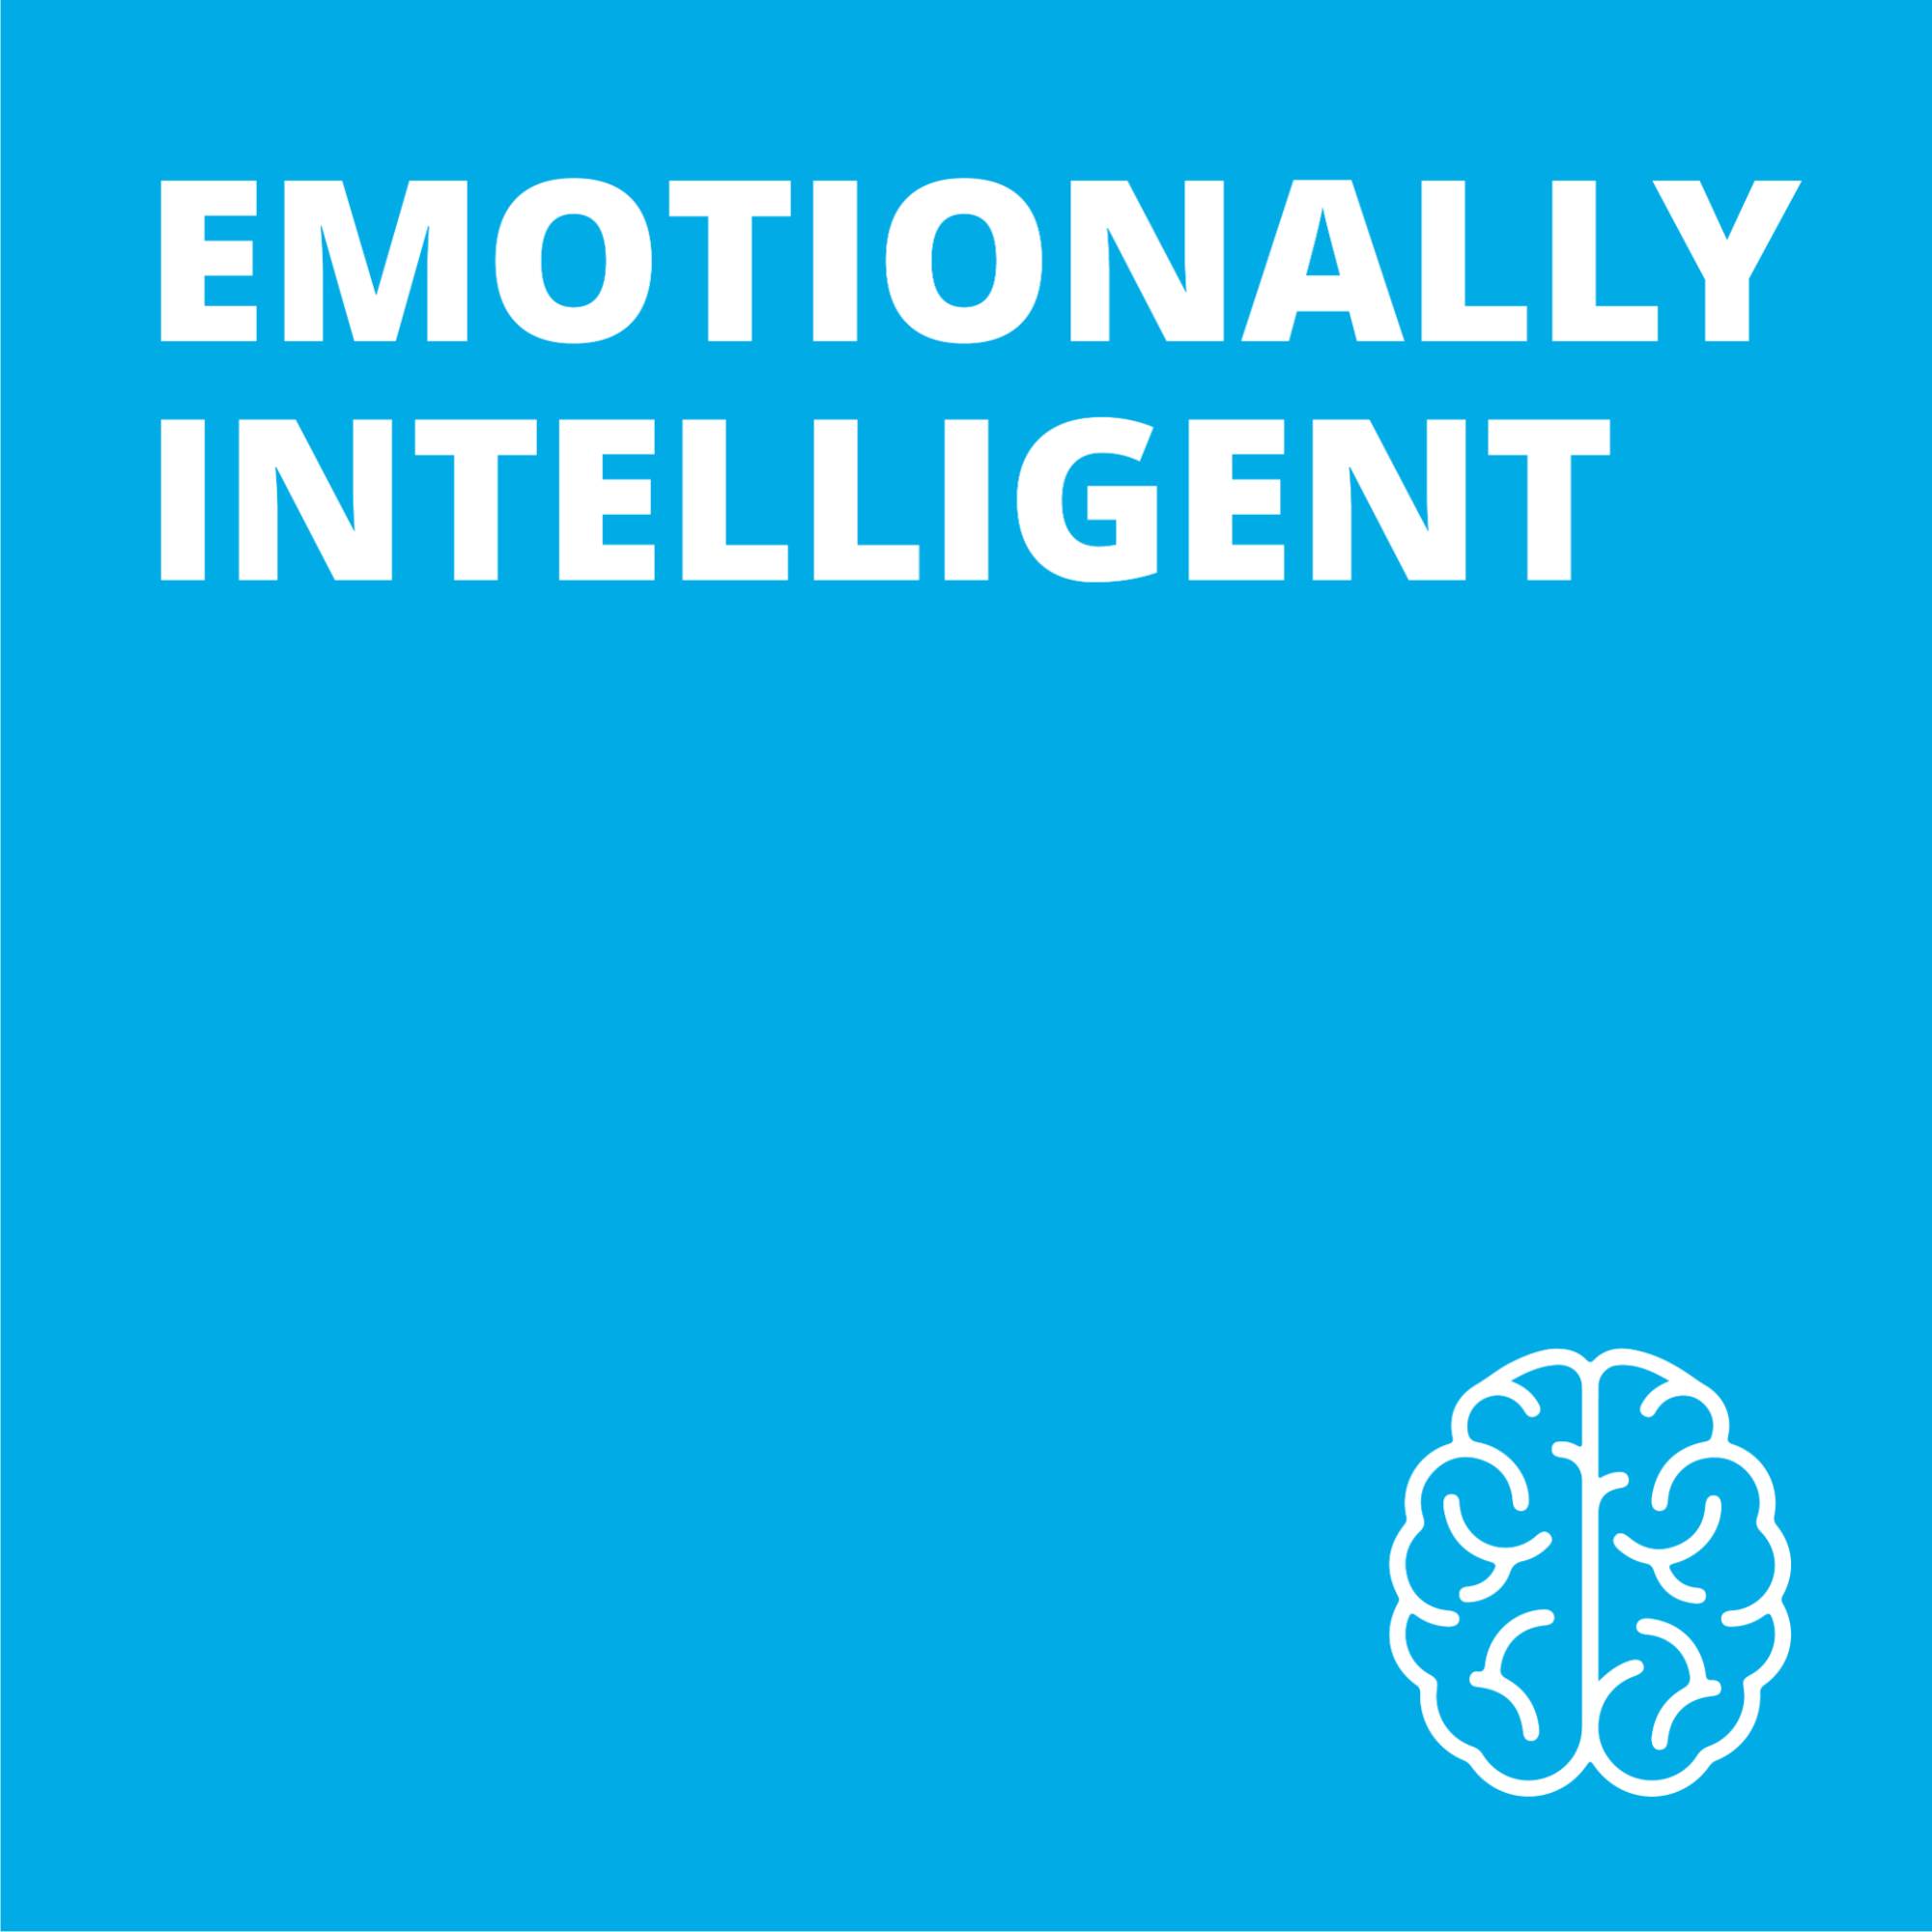 "Emotionally Intelligent" text with brain icon